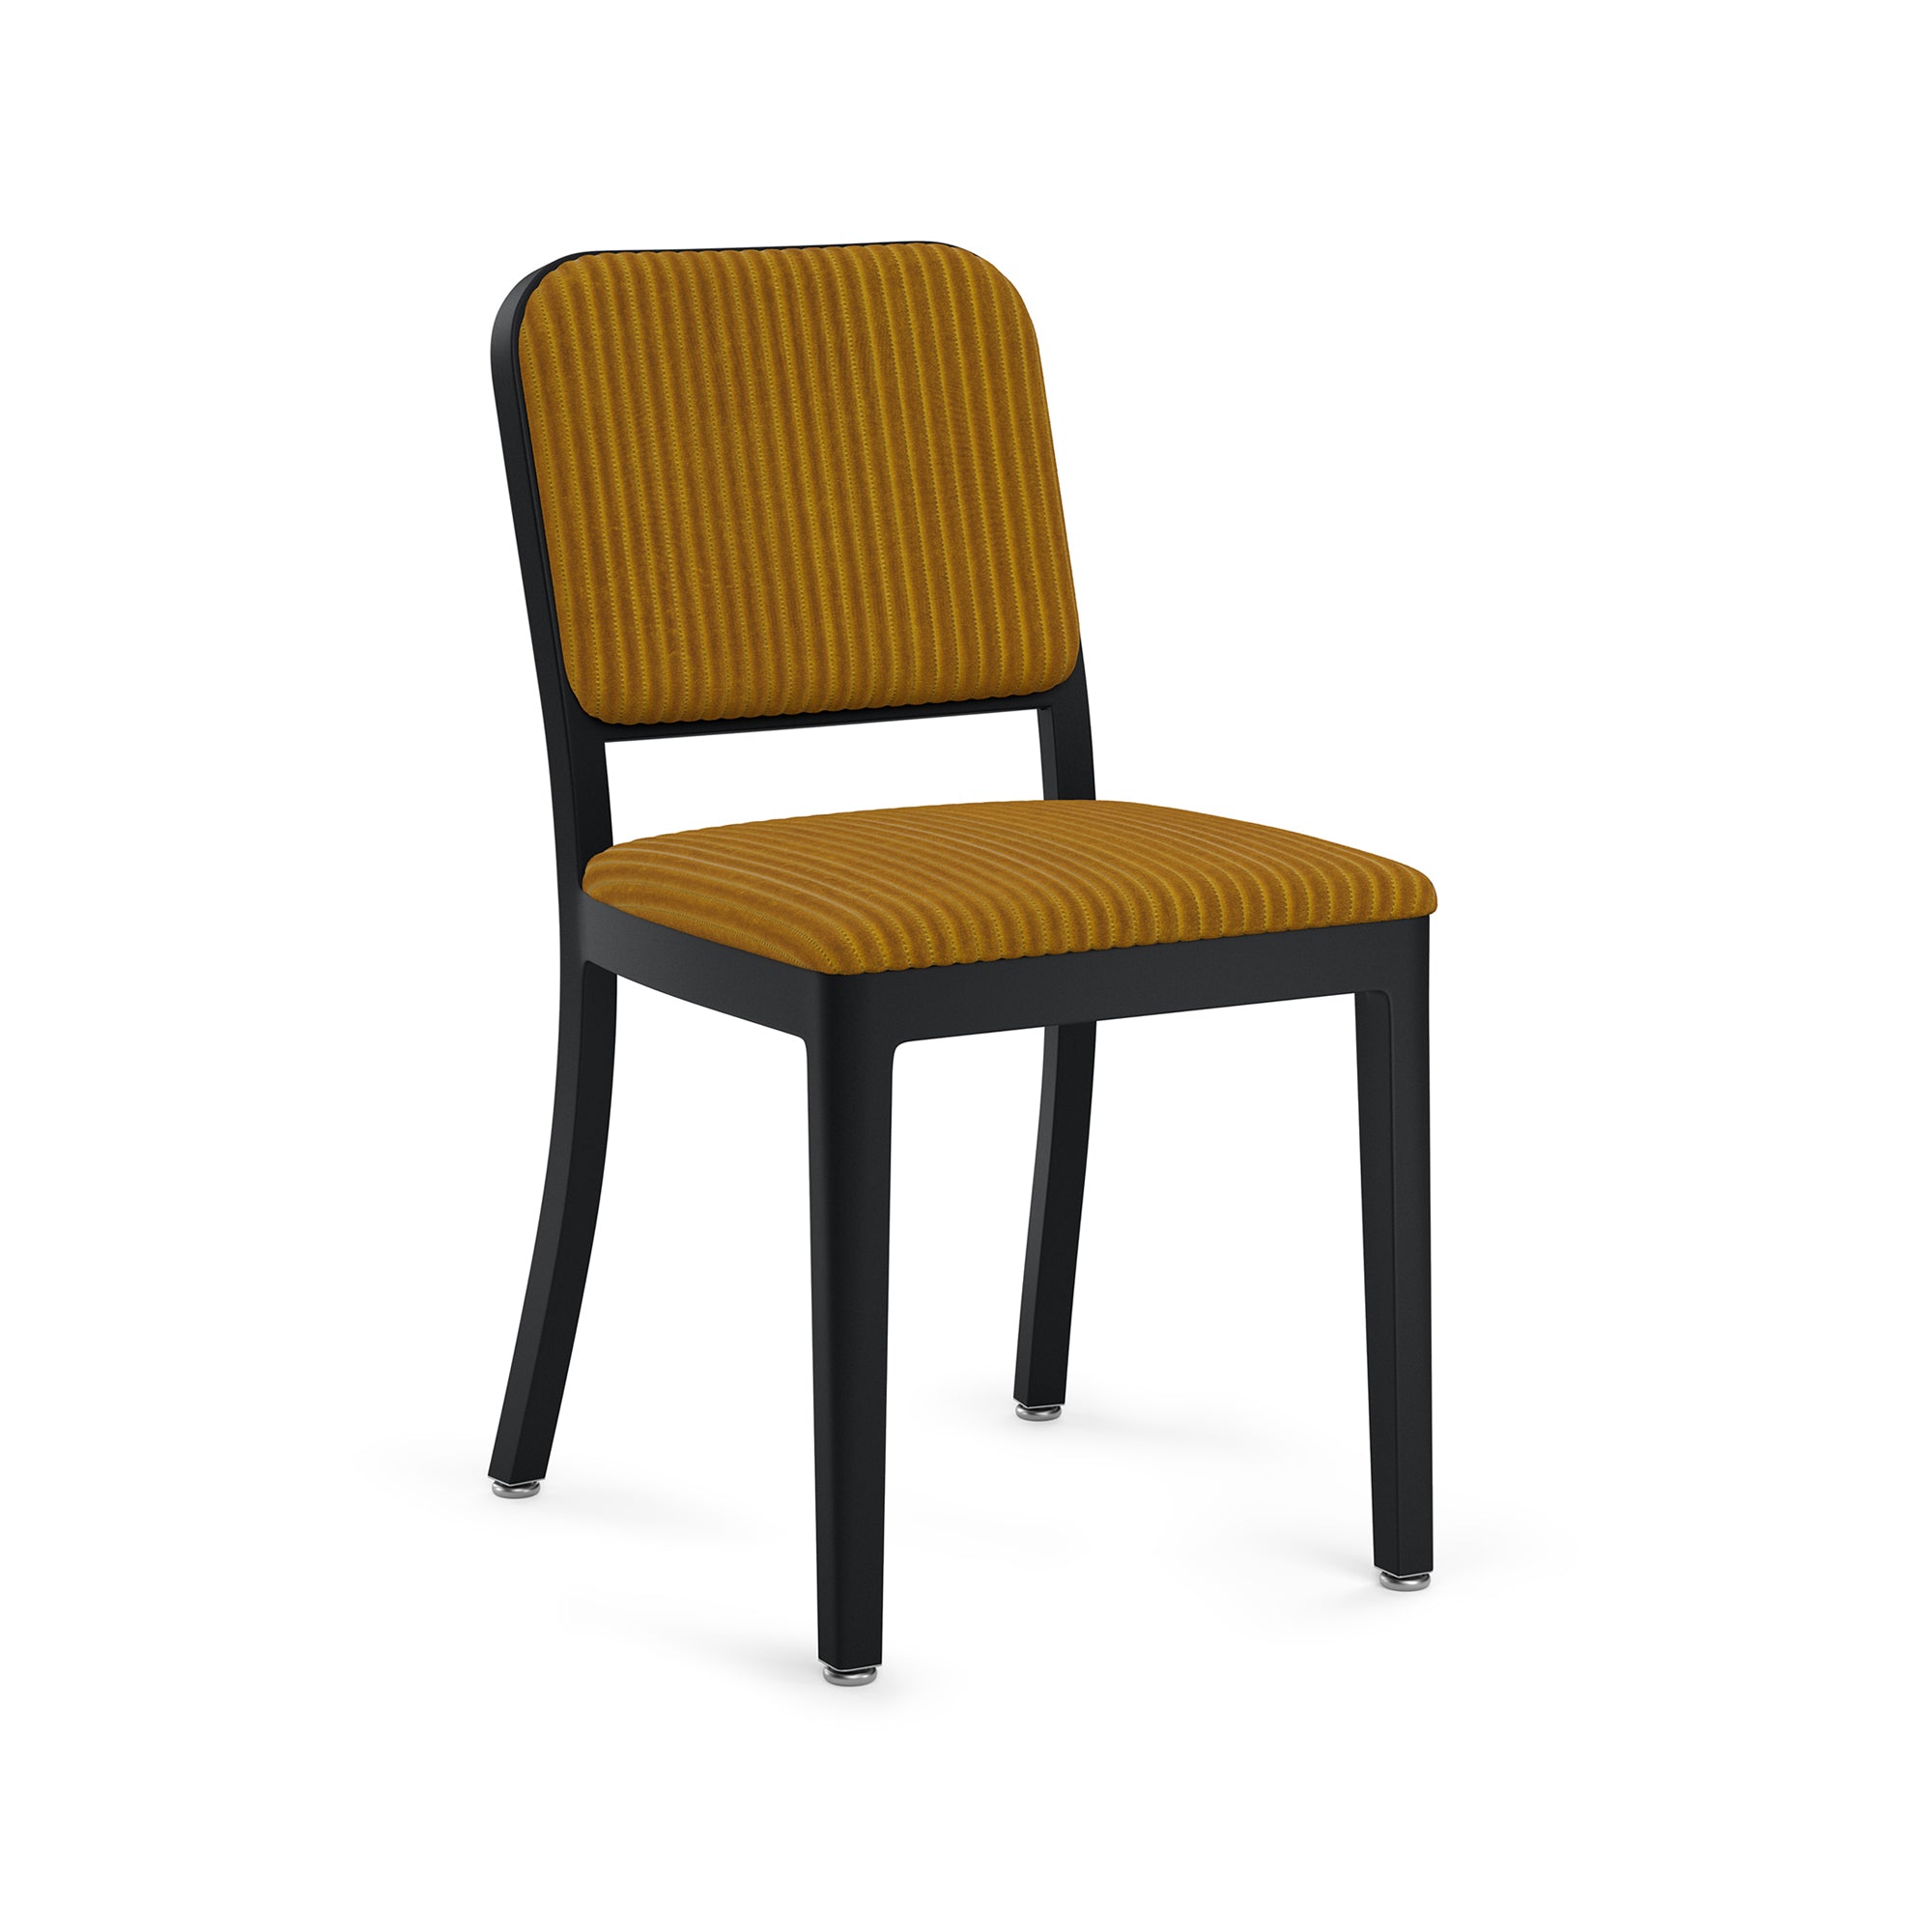 Navy Officer Chair